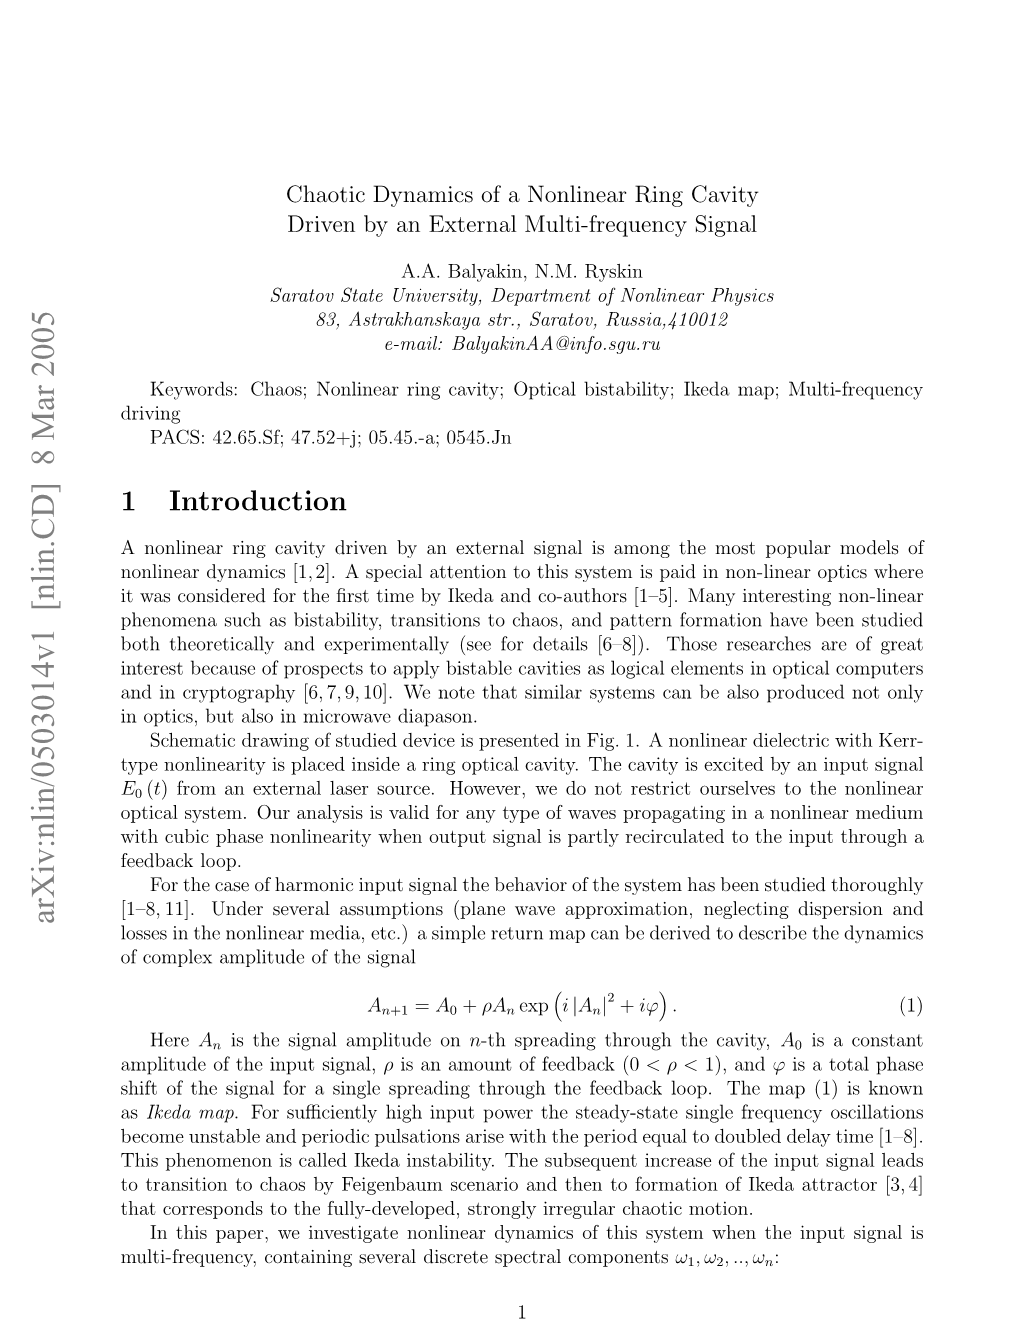 Chaotic Dynamics of a Nonlinear Ring Cavity Driven by an External Multi